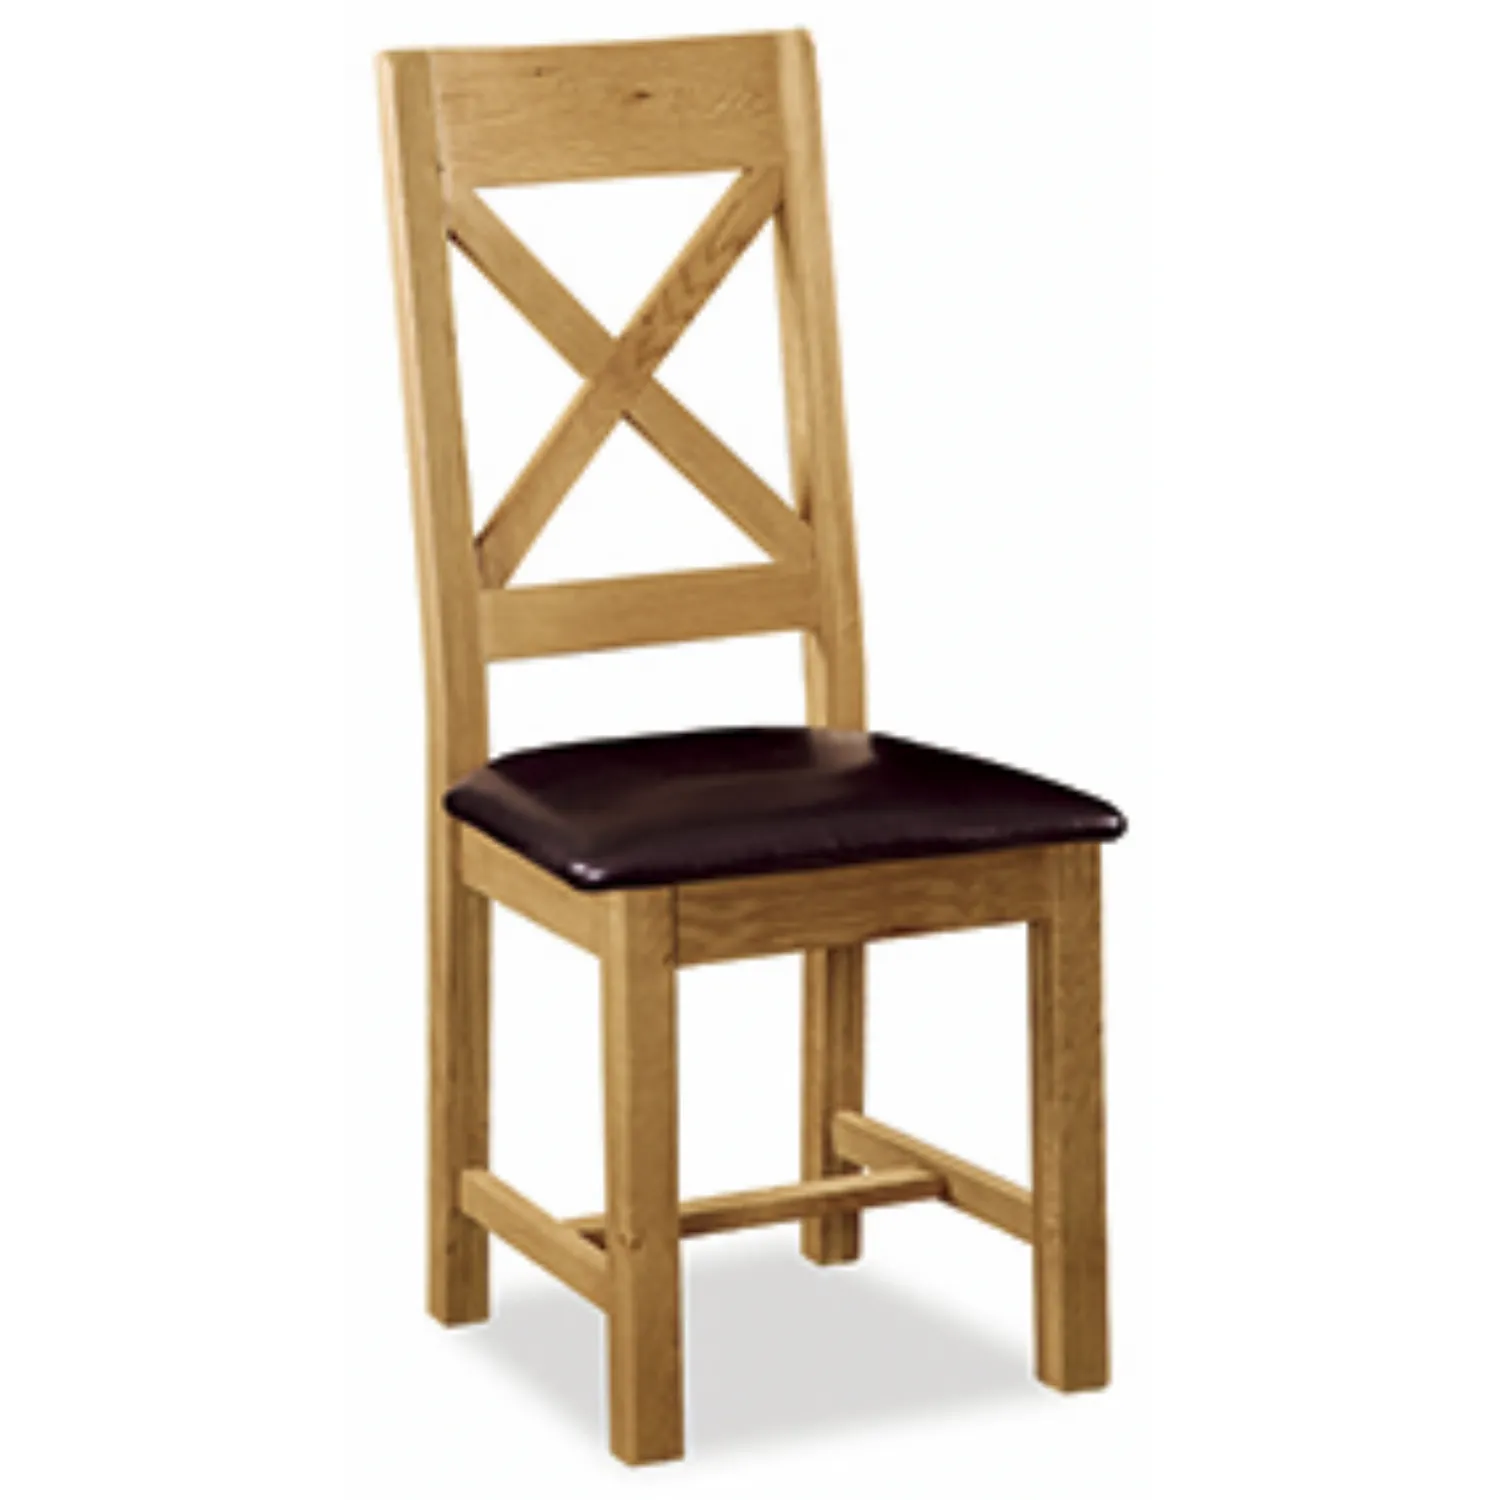 Rustic Solid Oak Cross Back Dining Chair With PU Seat